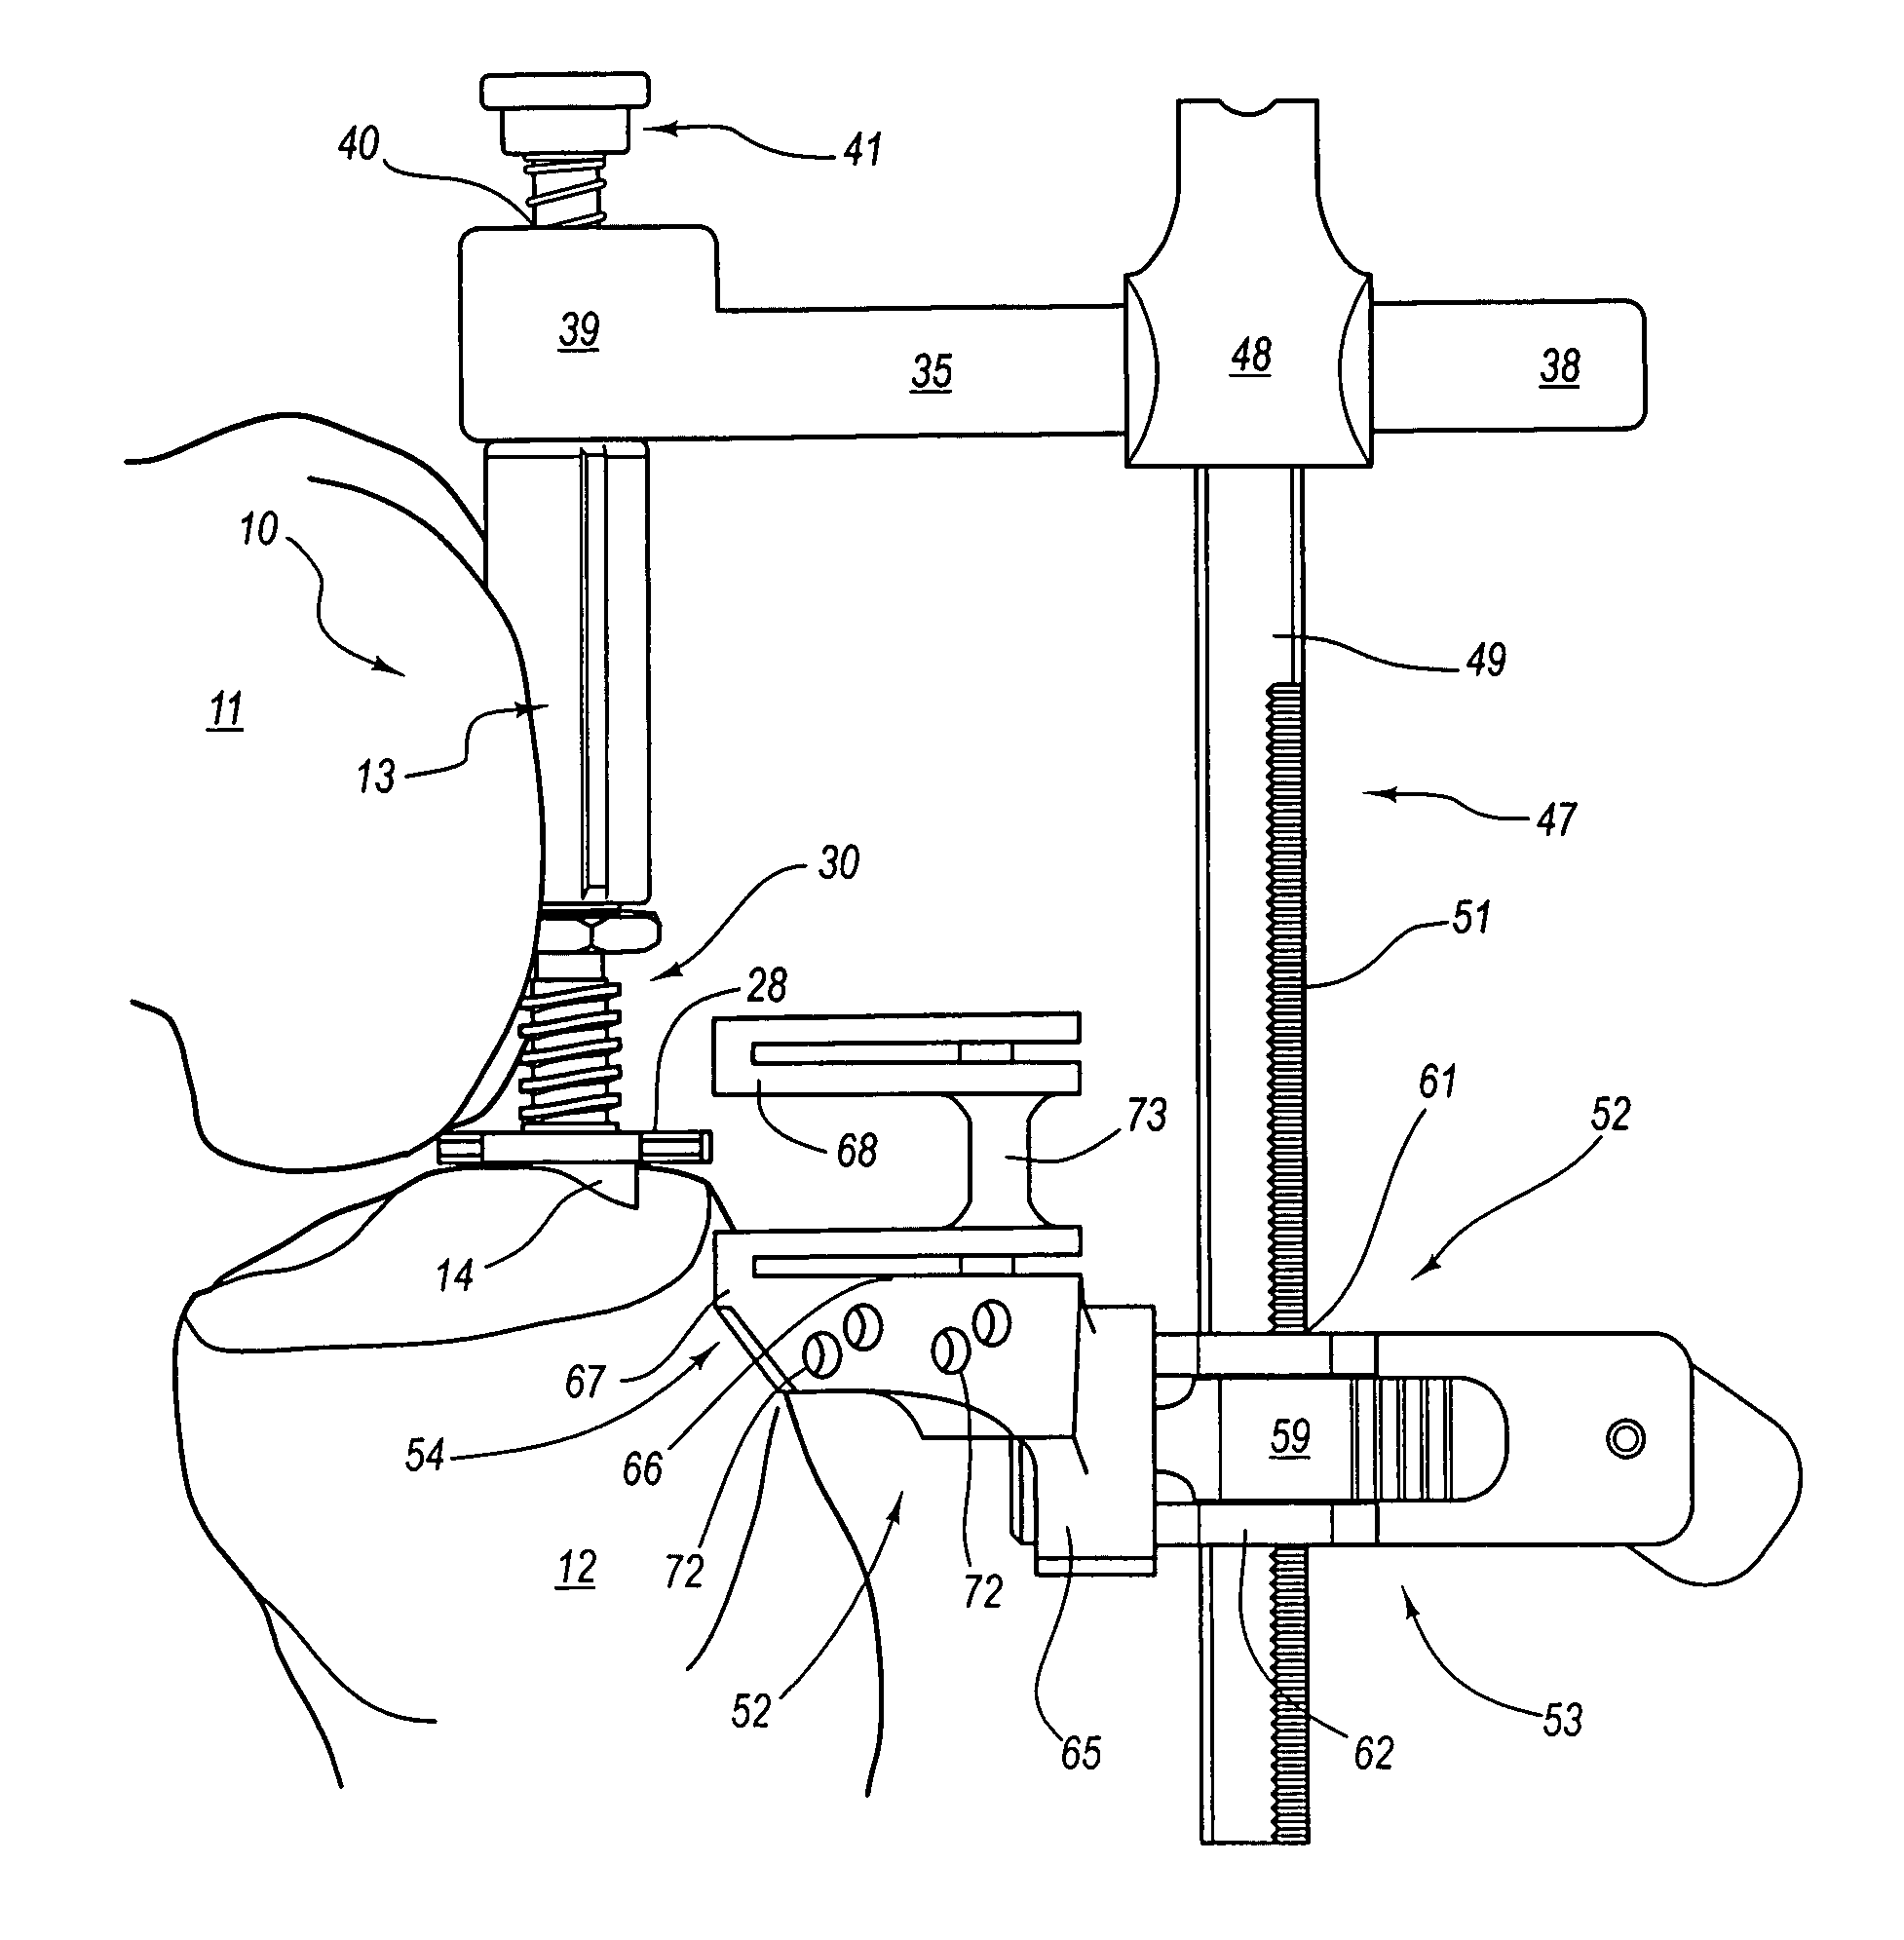 Guide assembly for guiding cuts to a femur and tibia during a knee arthroplasty